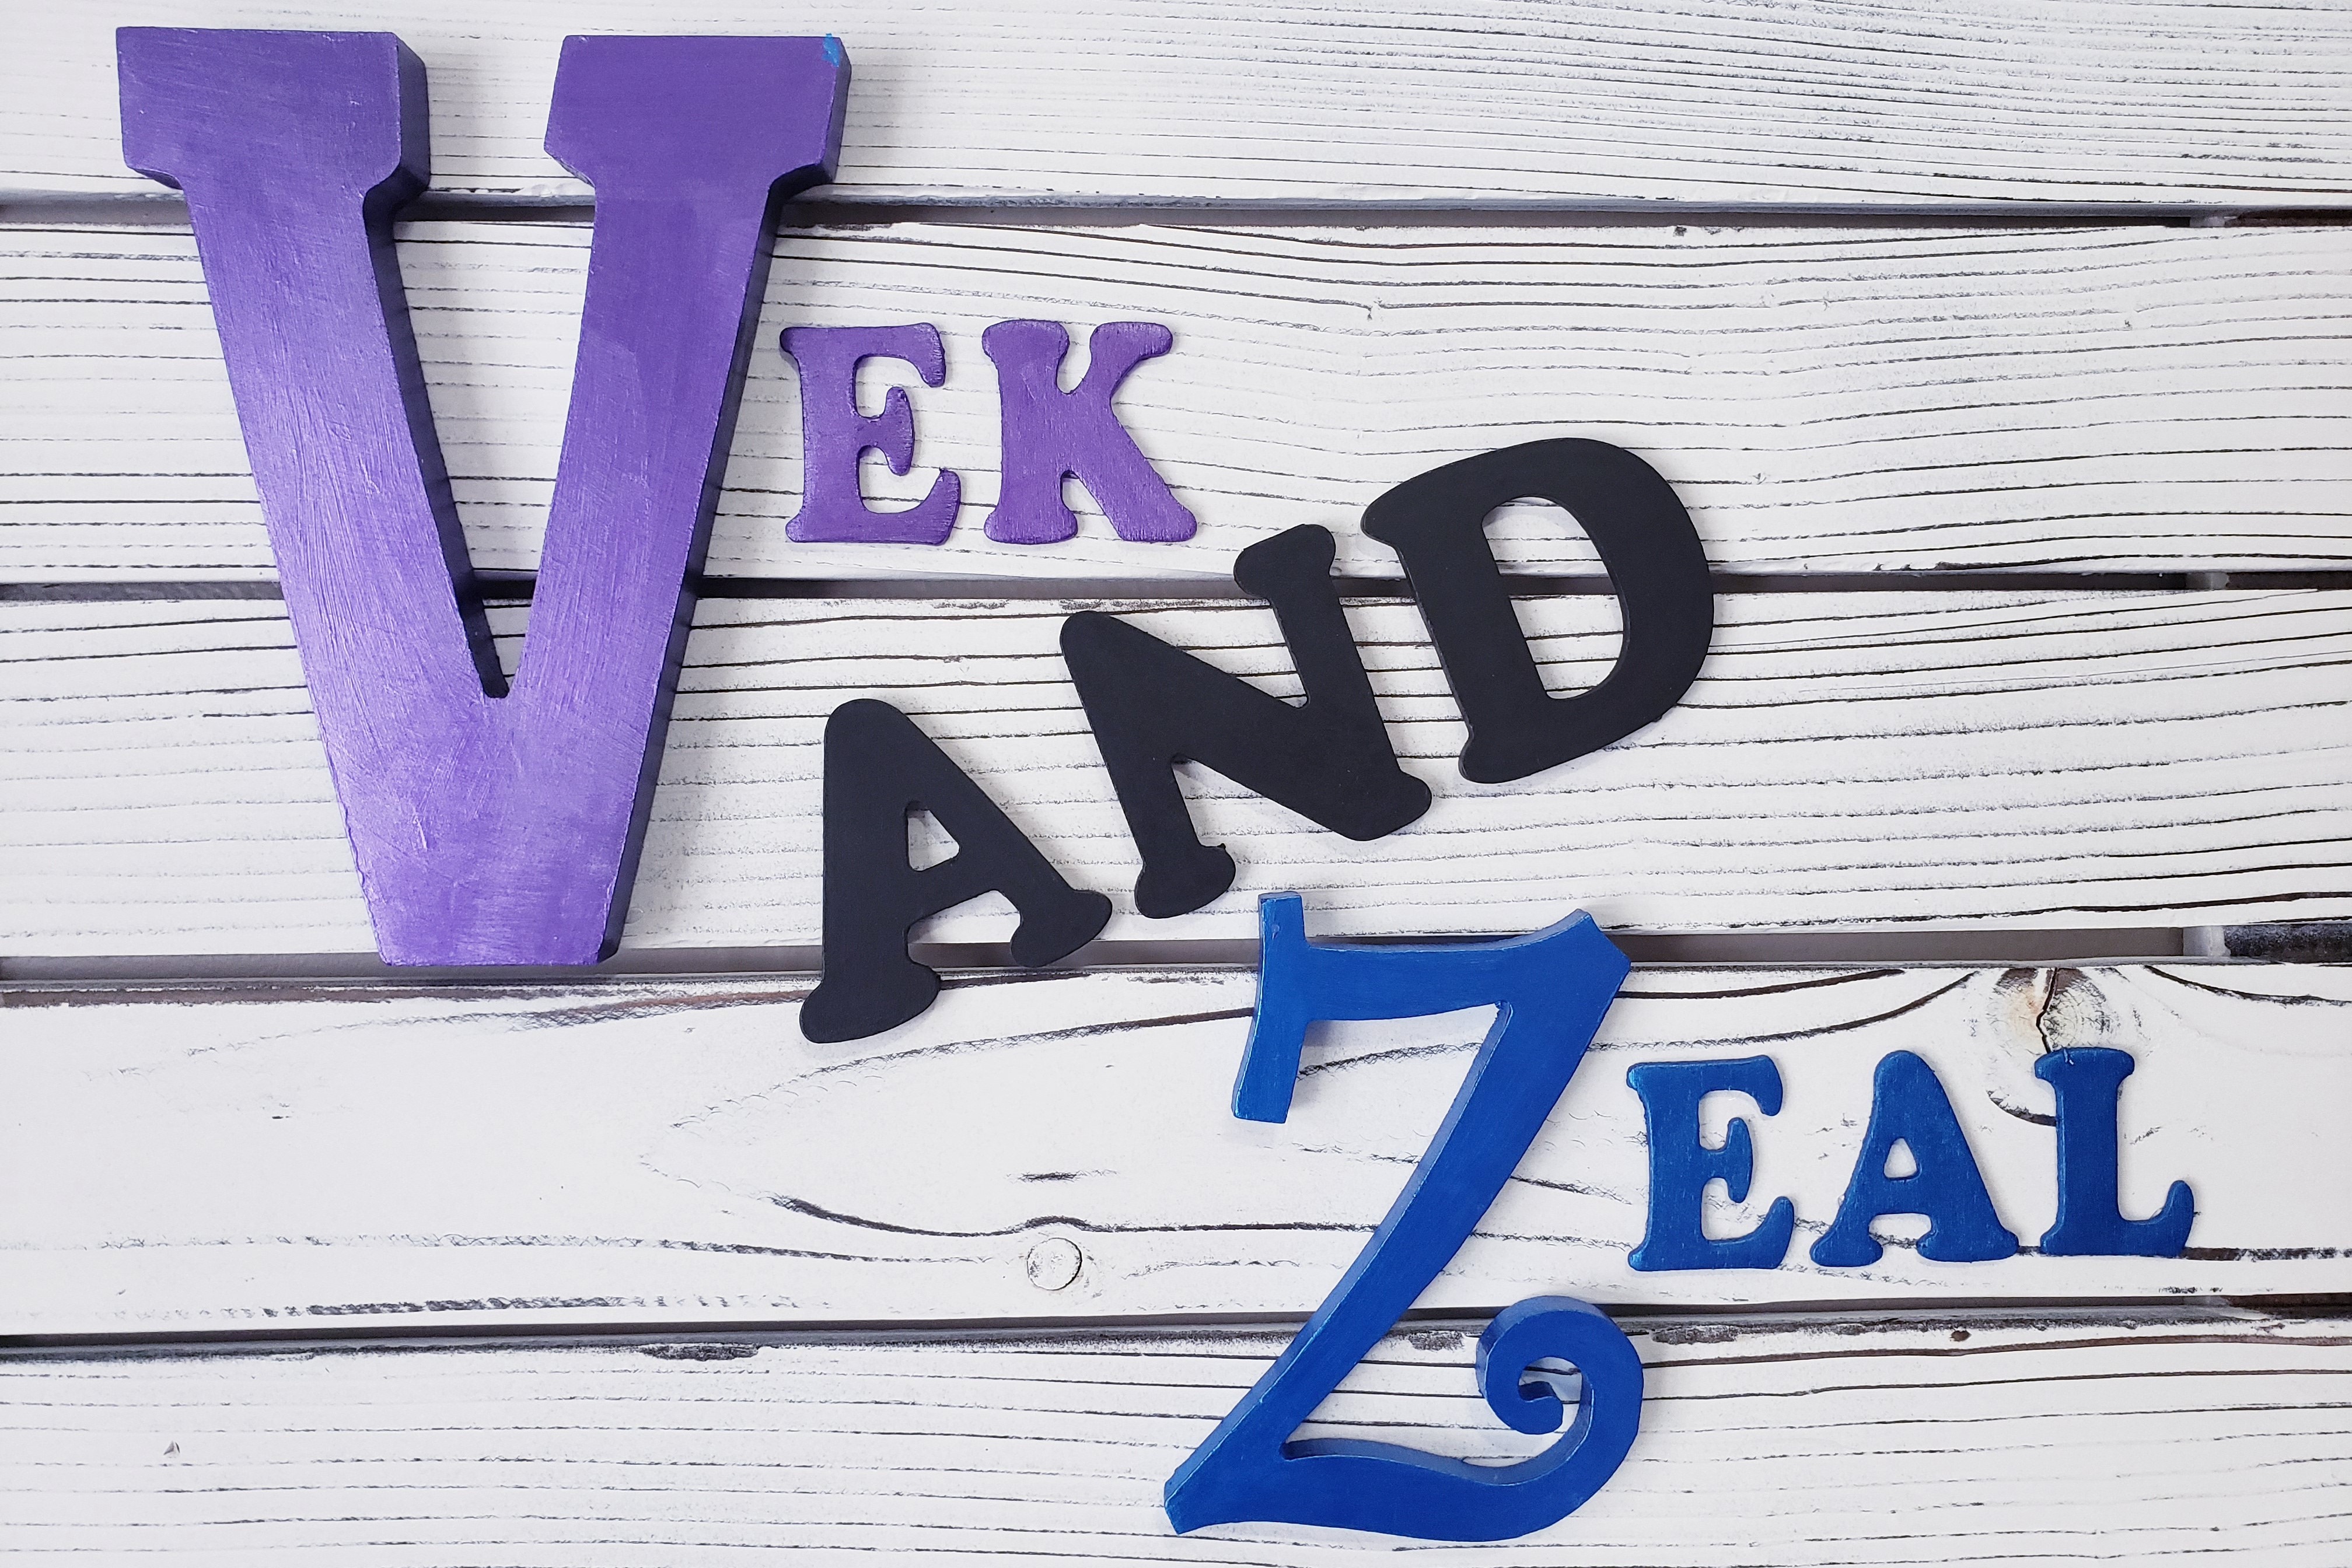 Vek and Zeal